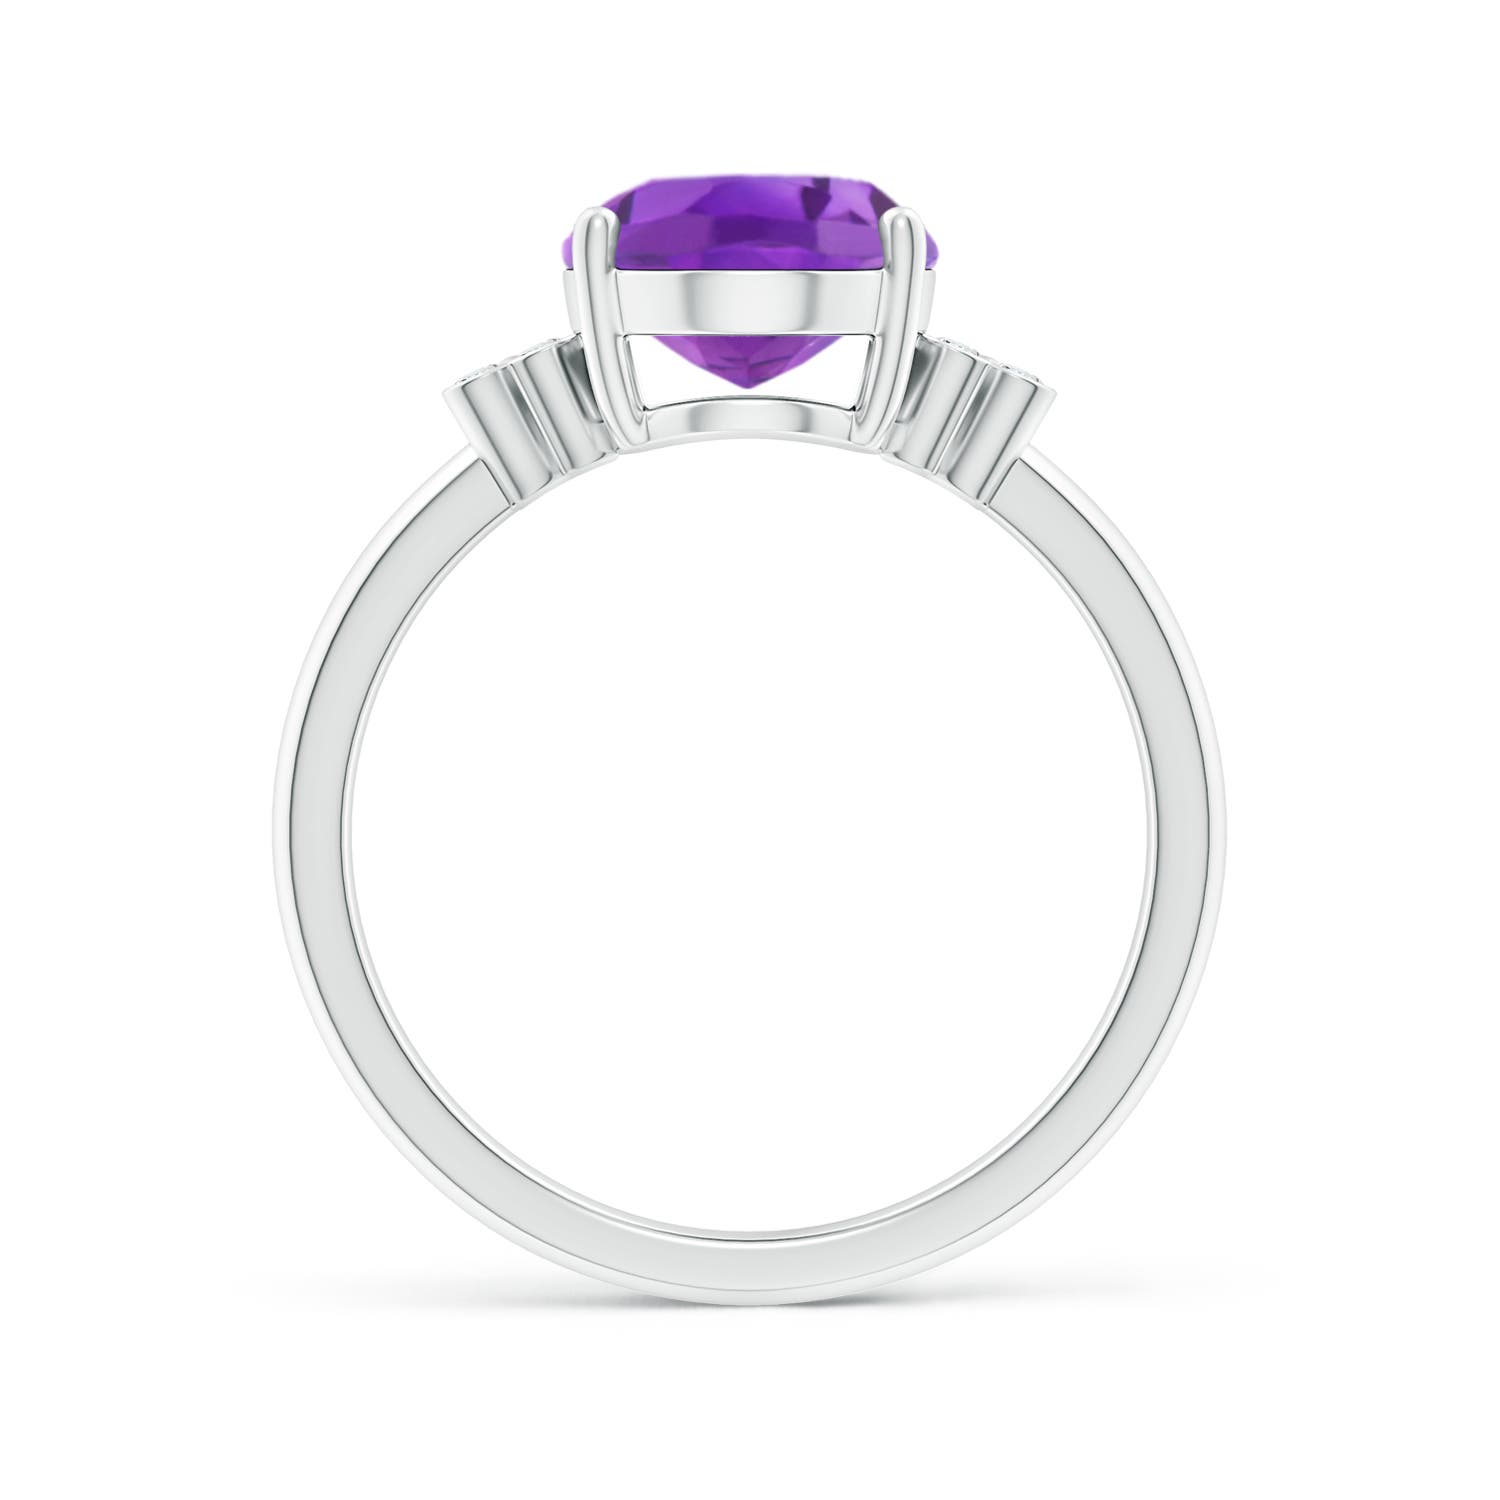 AA - Amethyst / 2.36 CT / 14 KT White Gold